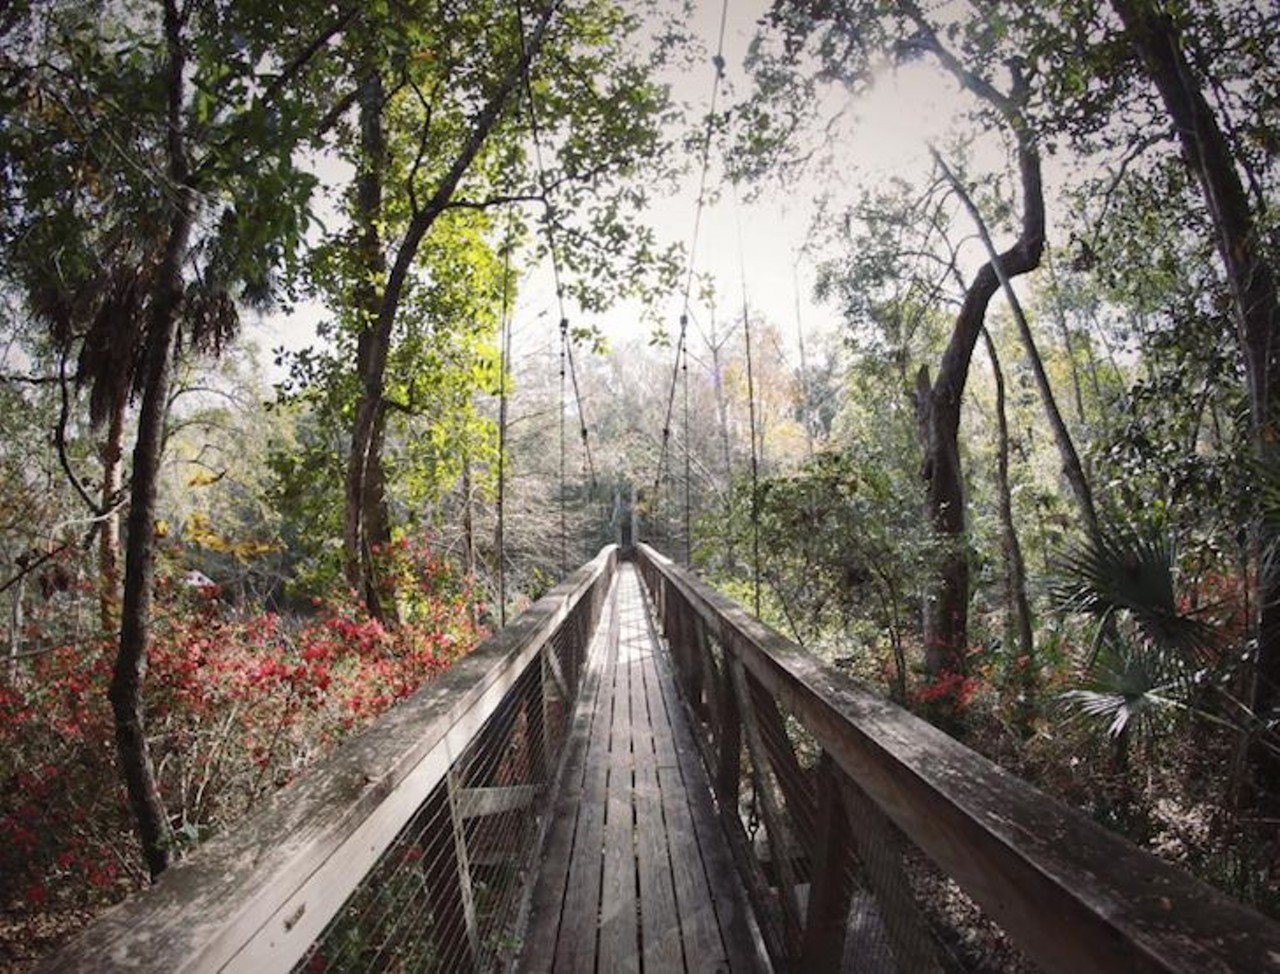 Ravine Gardens State Park
1600 Twigg St., Palatka, (386) 329-3721
The uncharacteristic hilly terrain of this part of Florida calls for a hike, complete with a suspension bridge nestled in the canopy of the surrounding forest. 
Photo via sxvgejeremy/Instagram